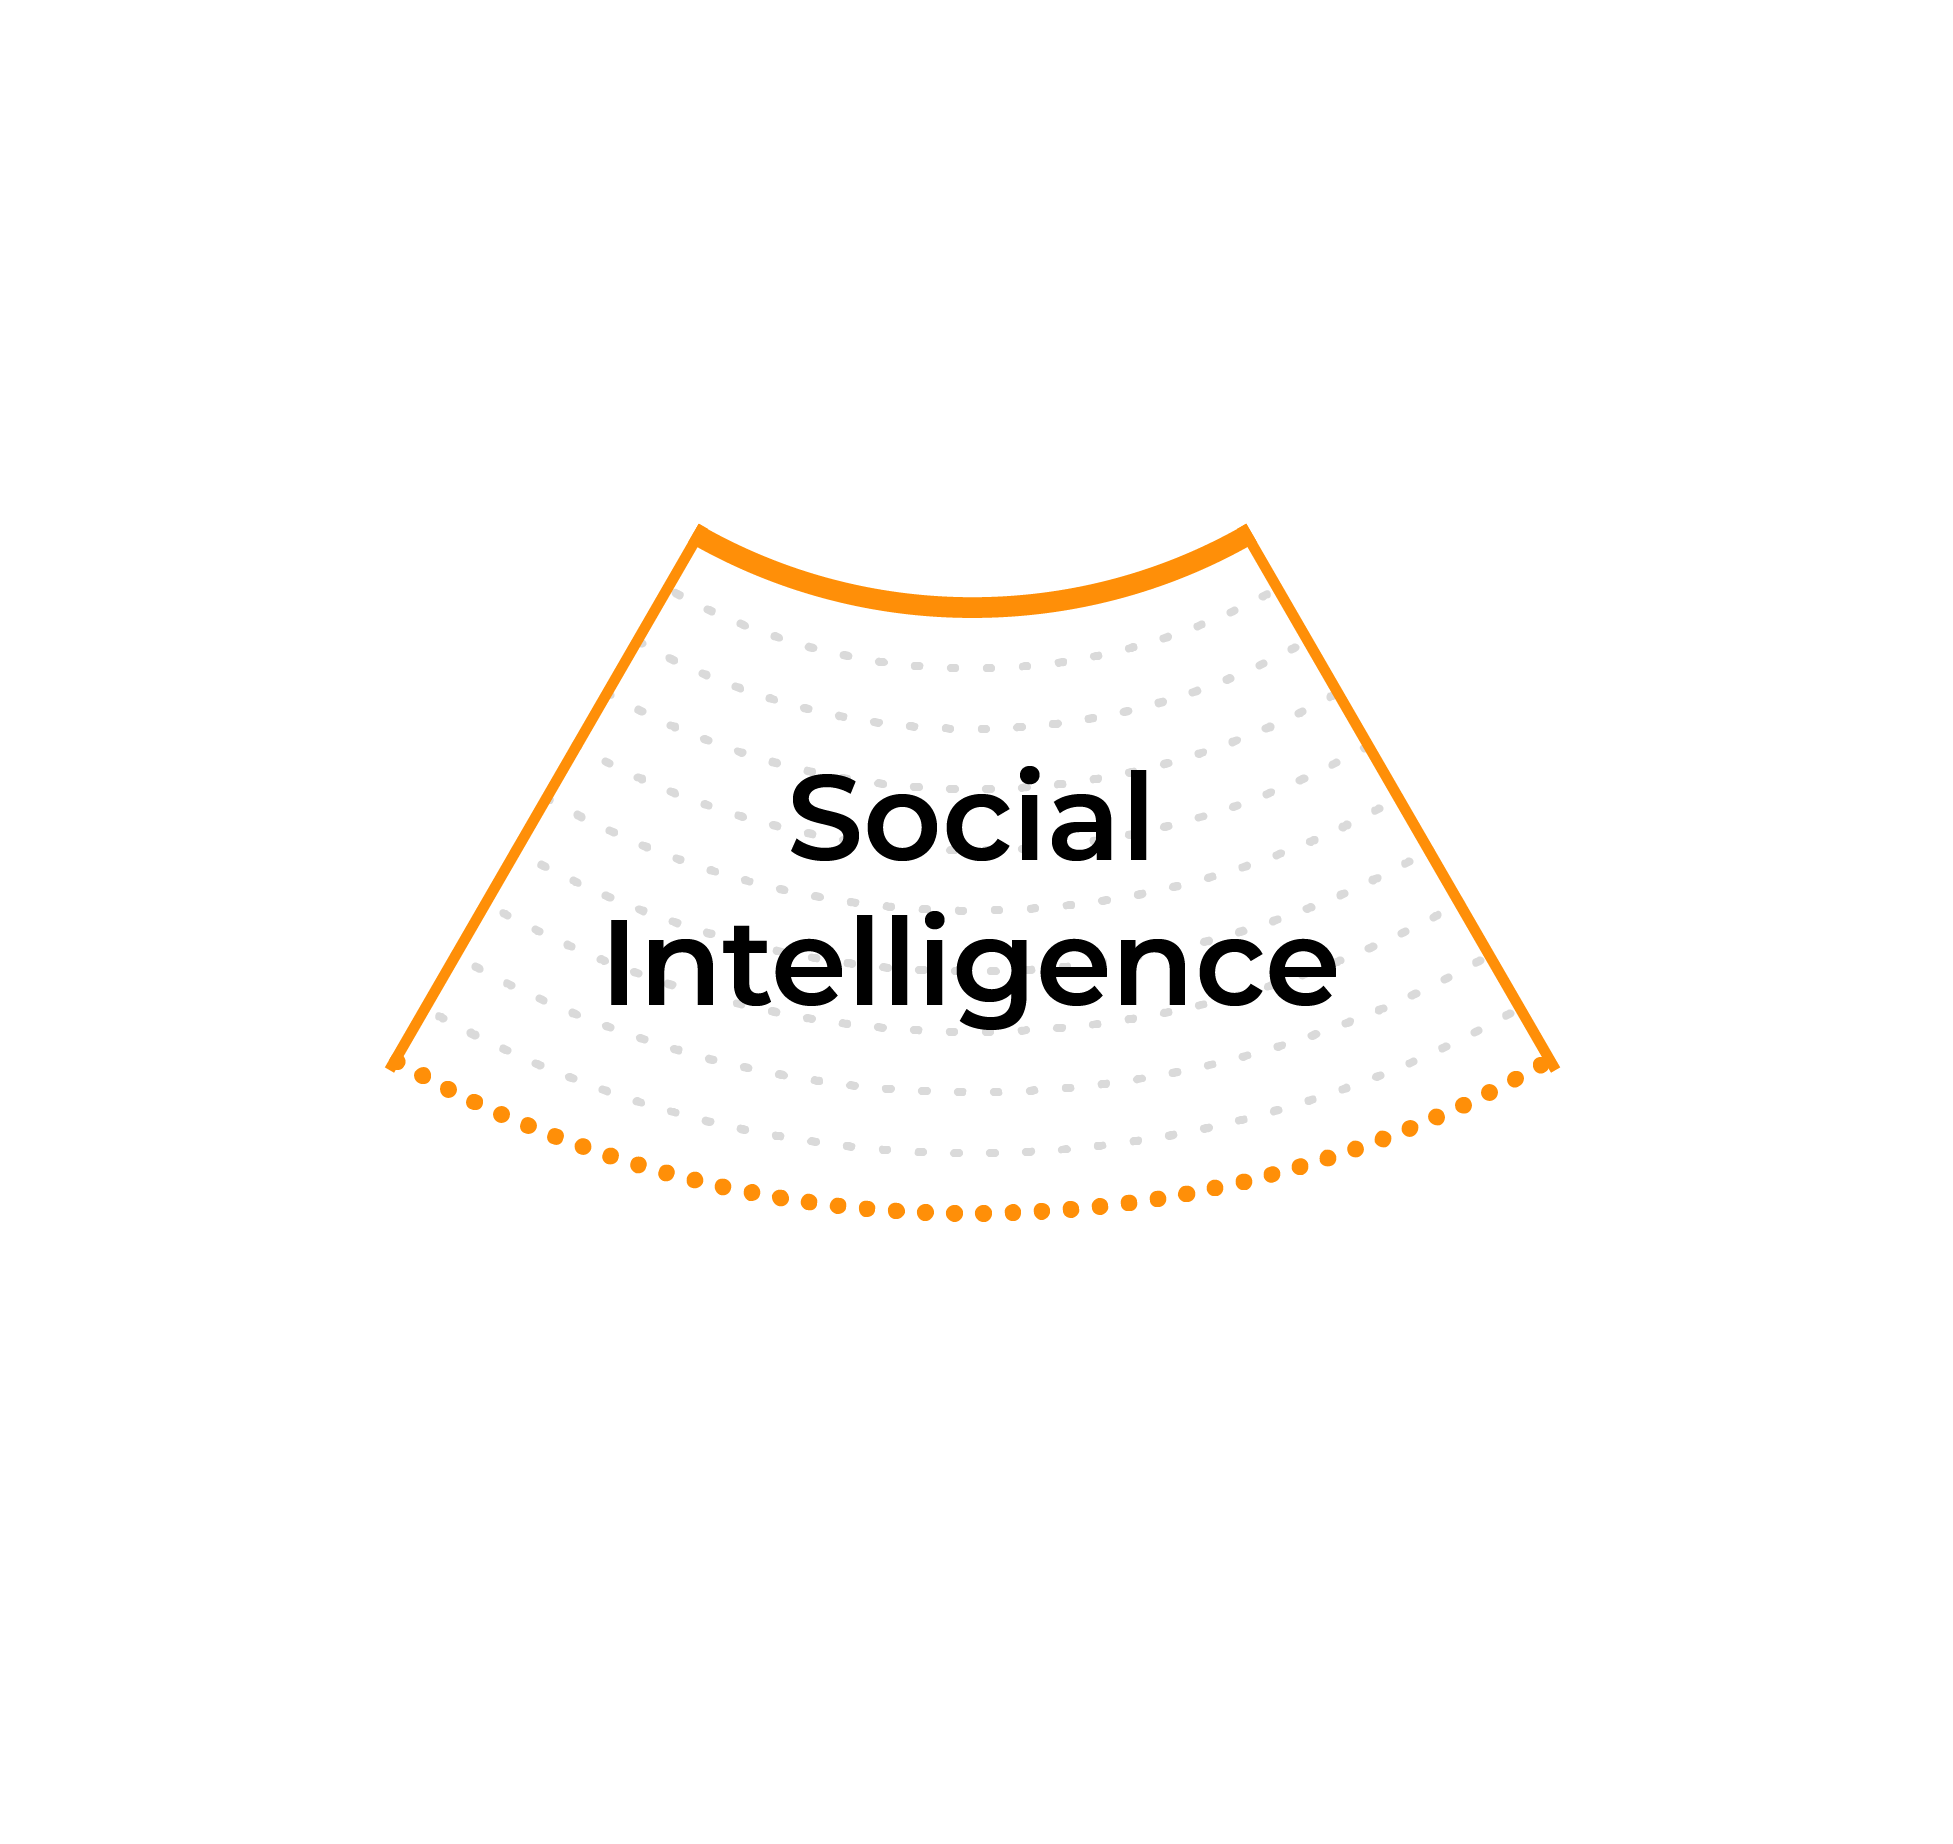 A Critical Factor for Working with People Today: Social Intelligence